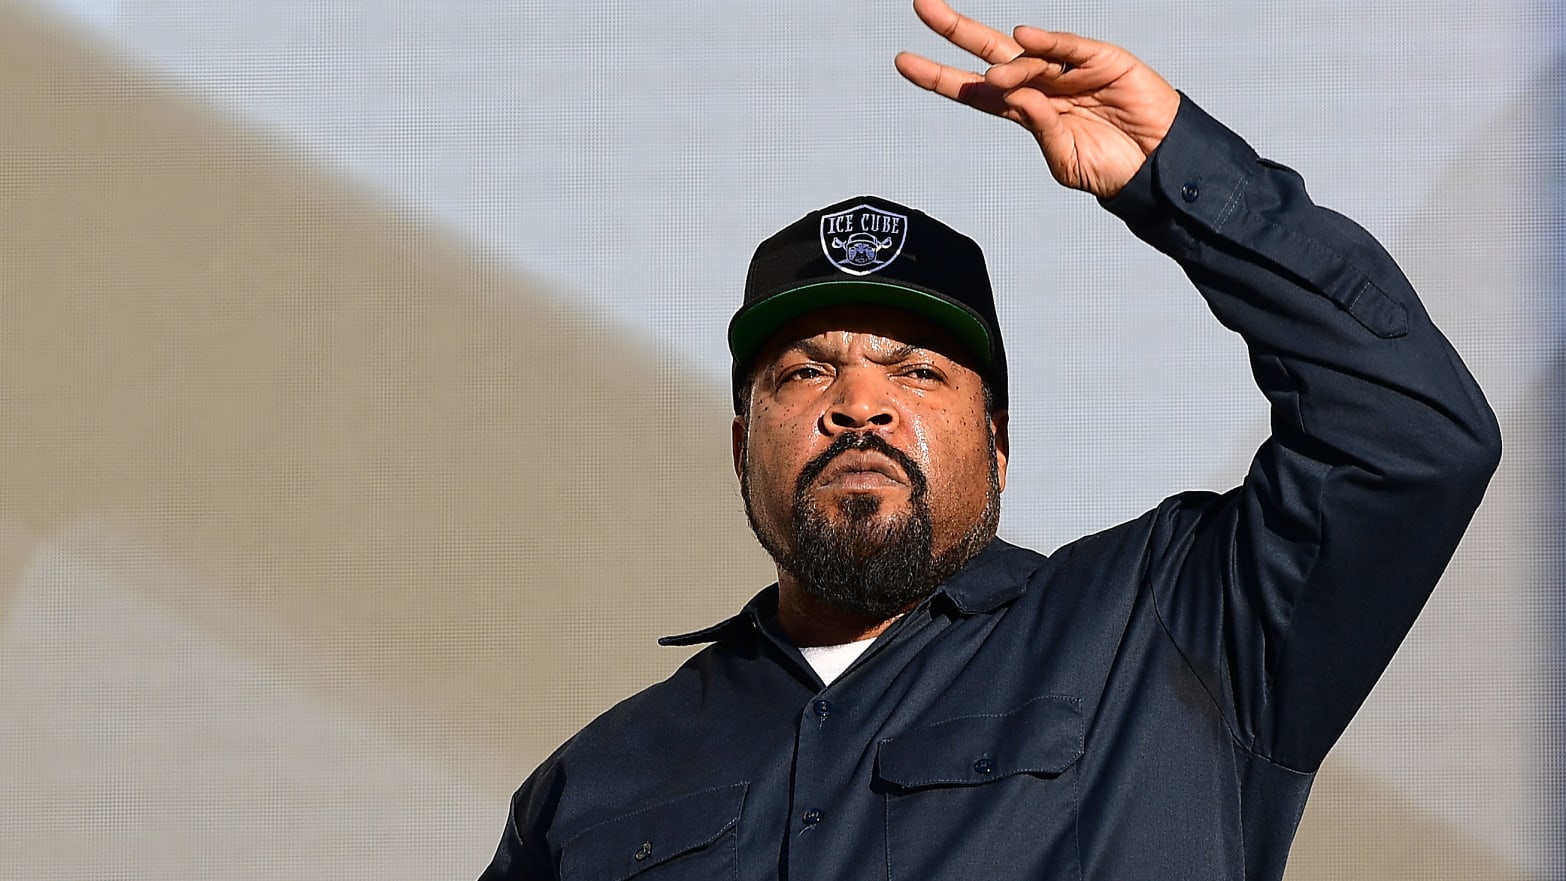 Ice Cube performs at Los Angeles Memorial Coliseum